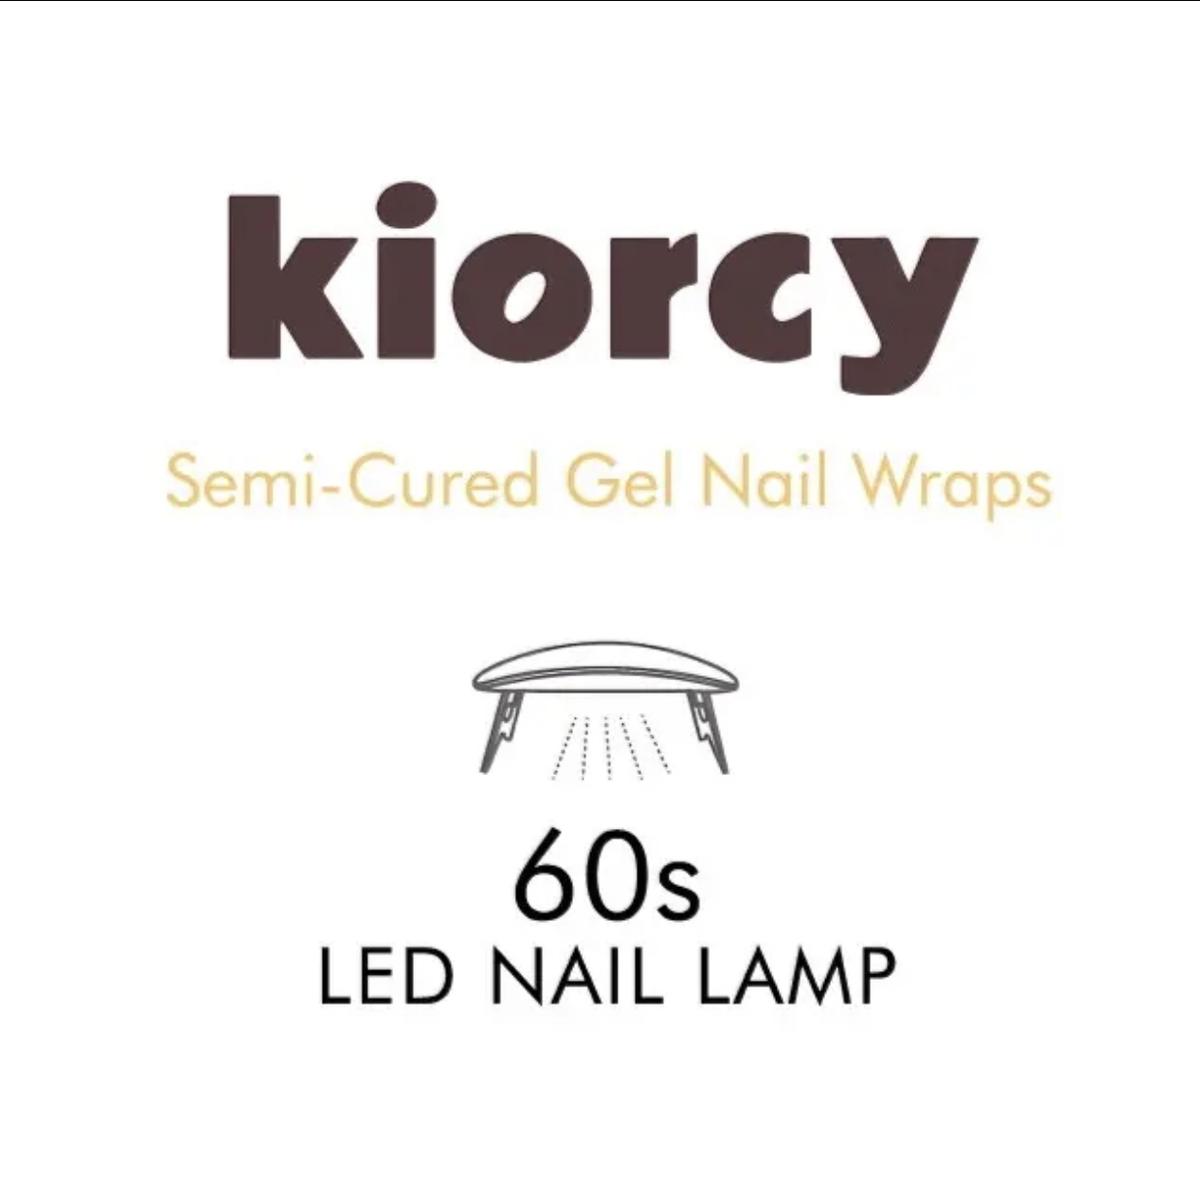 Kiorcy Gel Nail's images